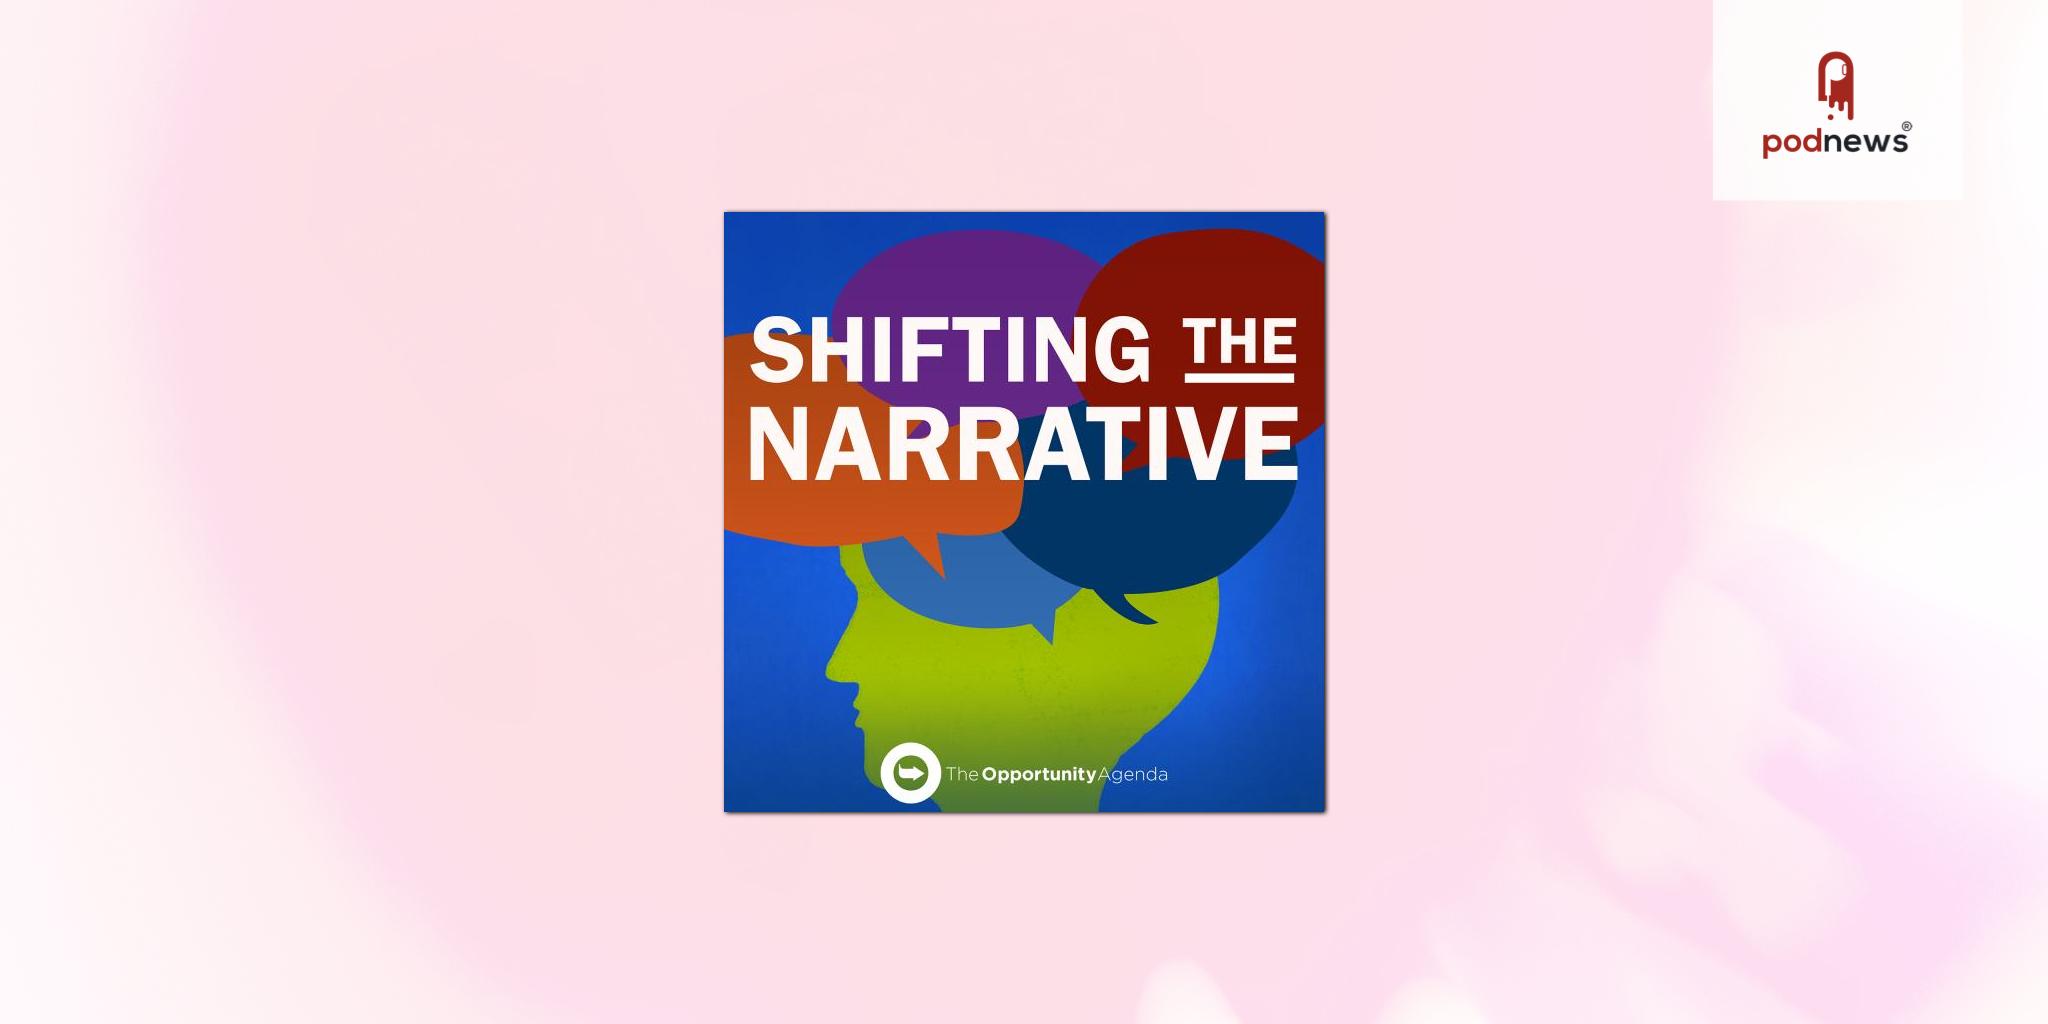 Shifting the Narrative Launched to Explore the History of Tipping Points on Key Political Issues